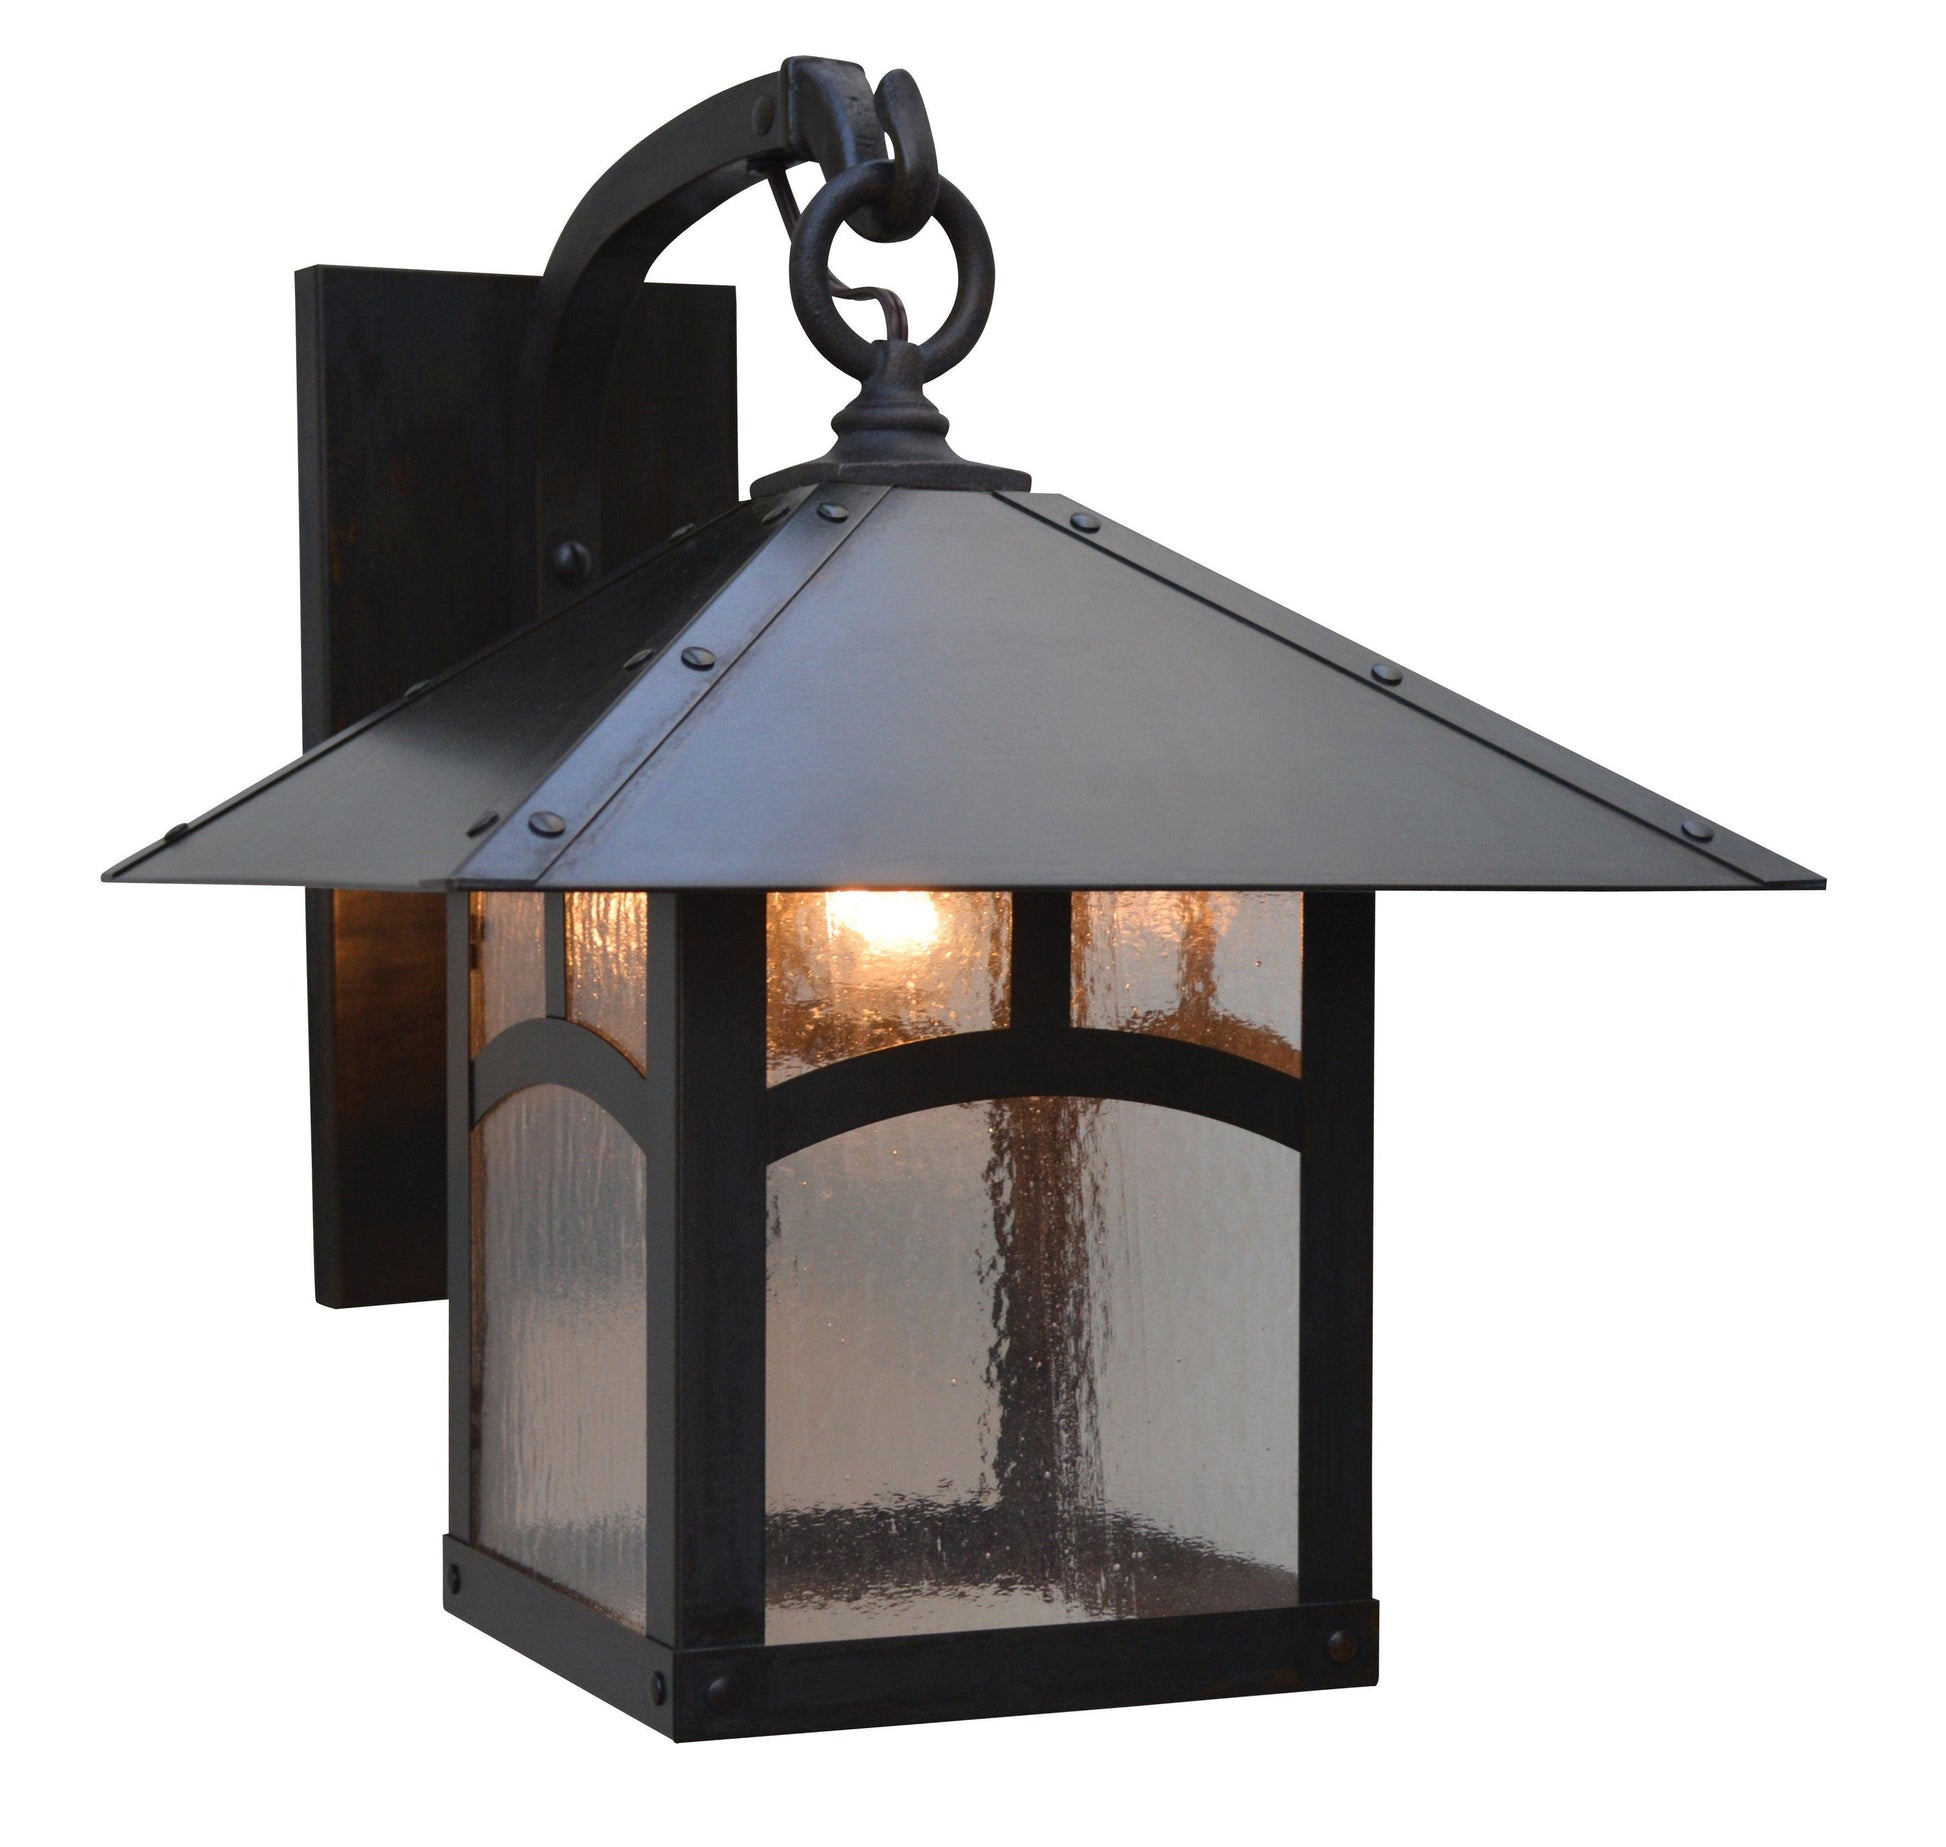 Arroyo Craftsman LV27-M6 Mission Craftsman Low Voltage Pathway Lighting -  27 inches tall by Arroyo Craftsman LV27M6, ARR-LV27-M6